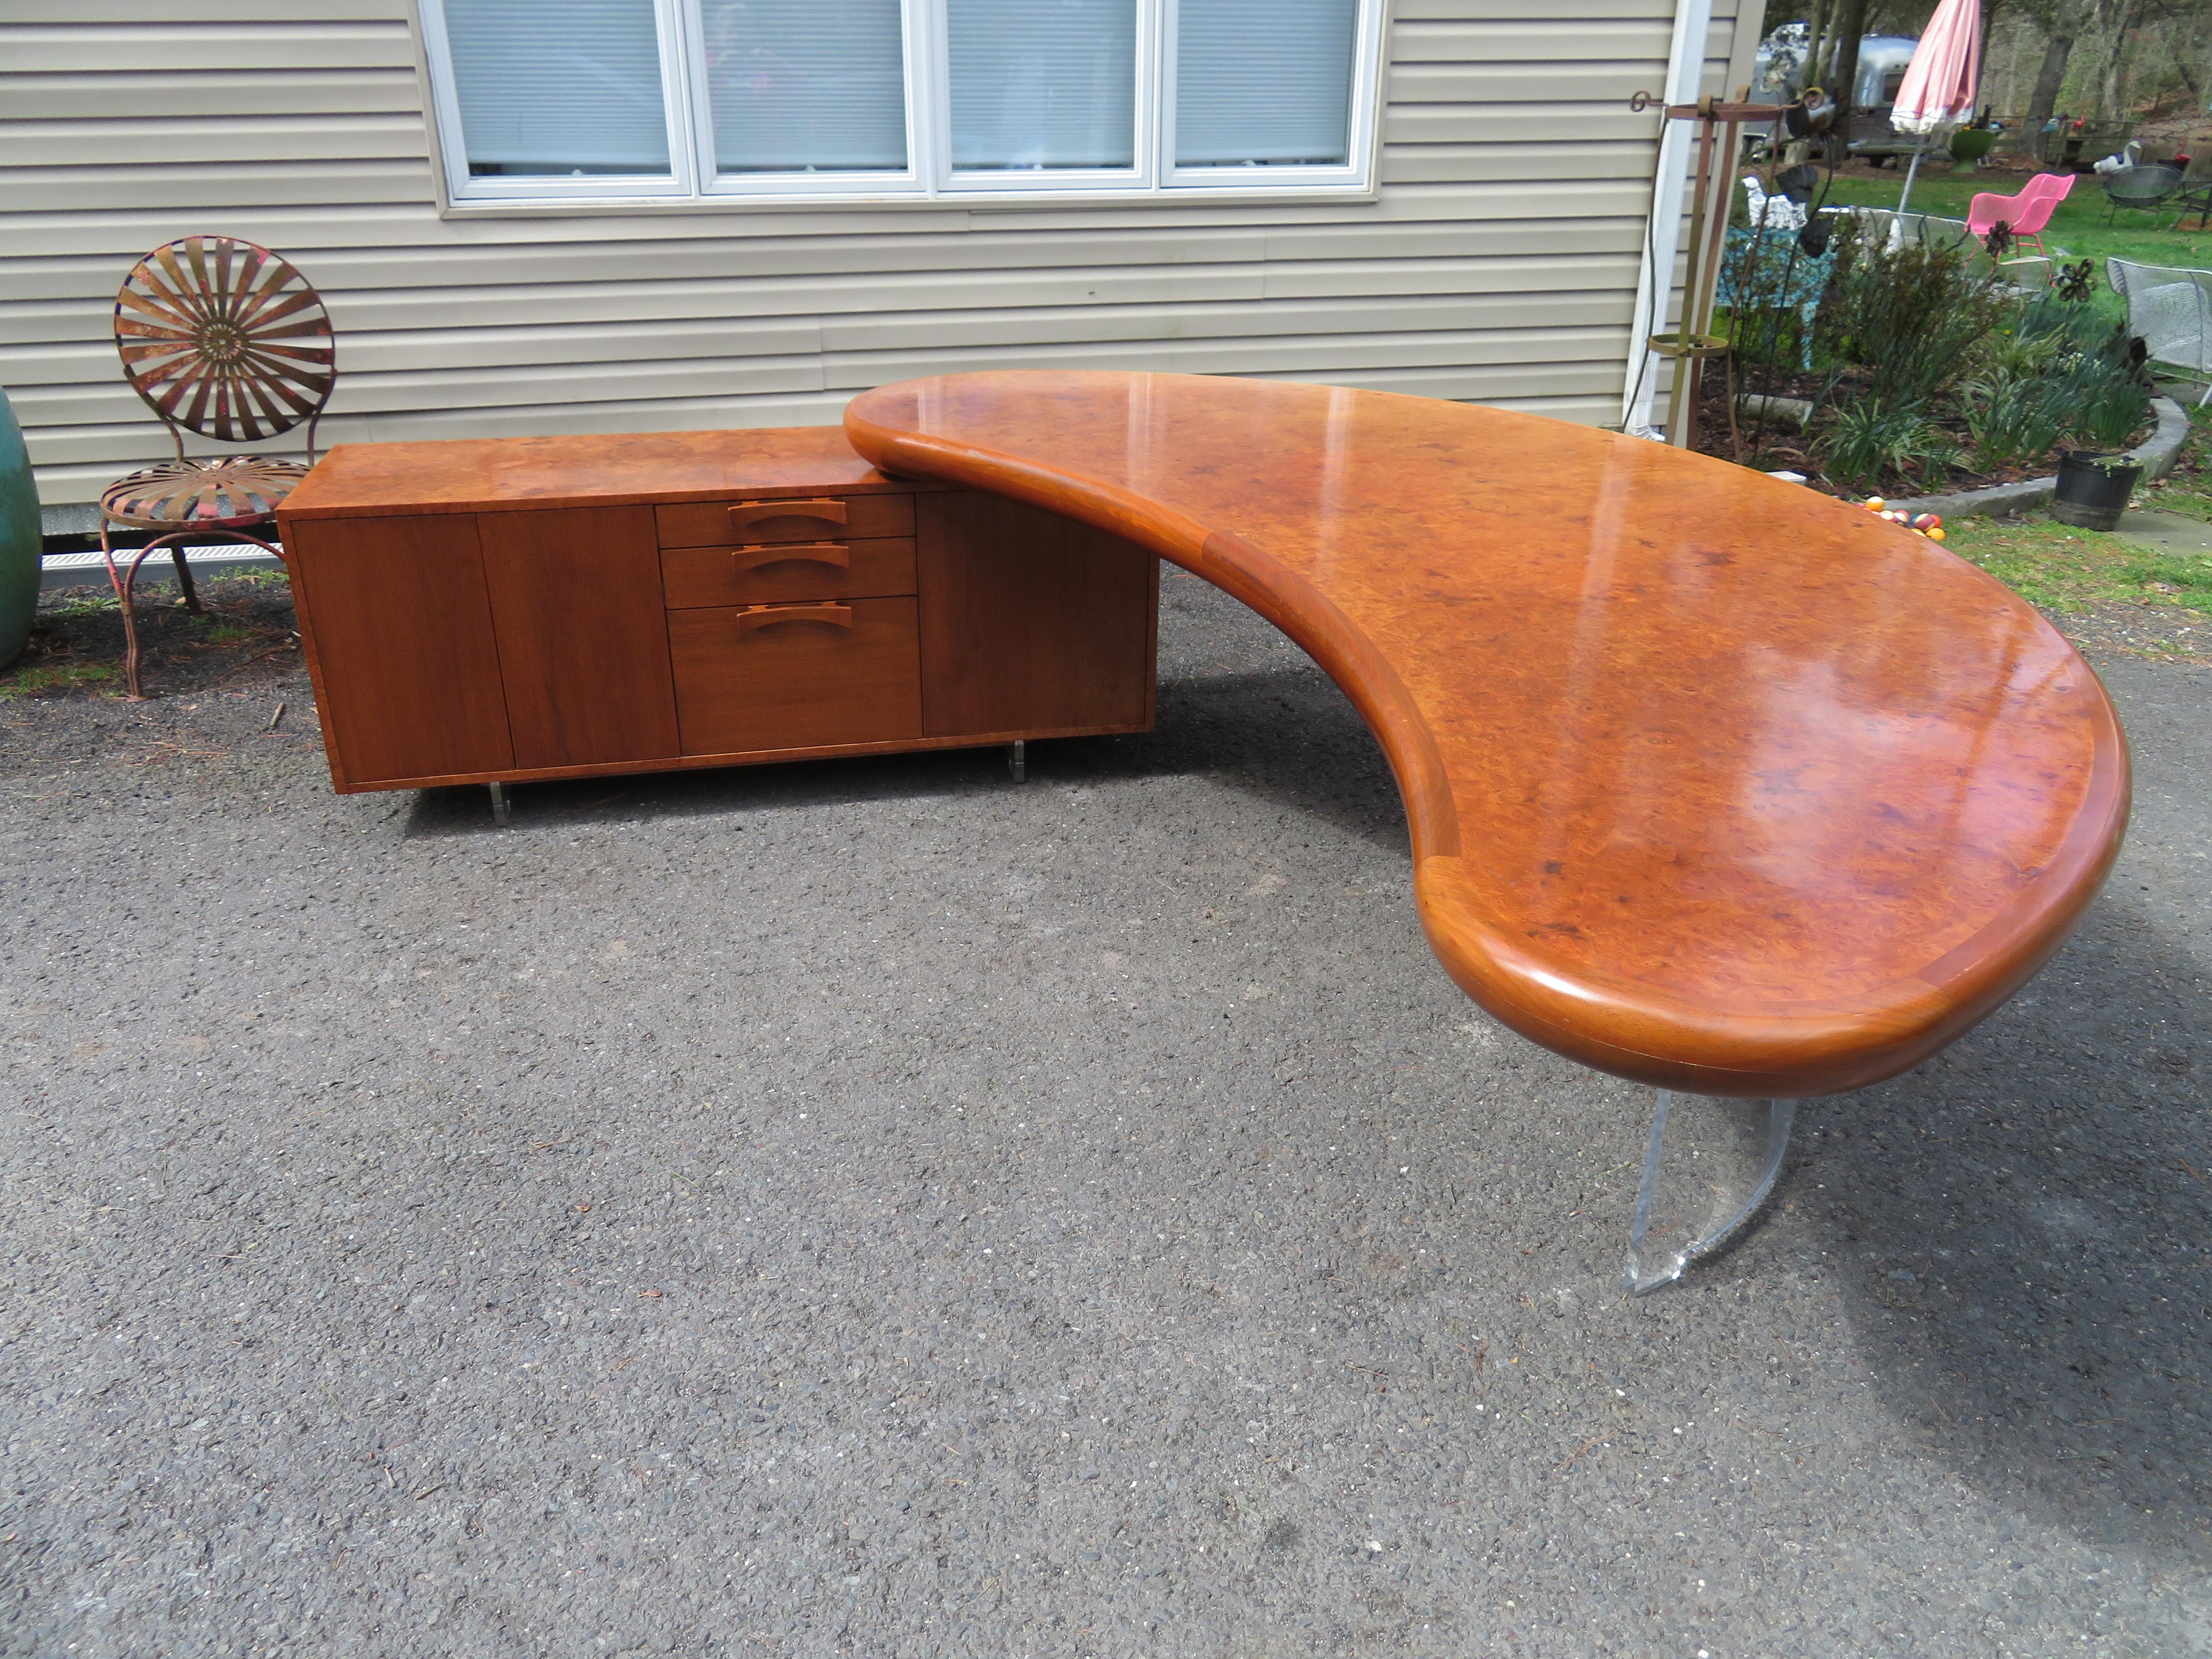 Magnificent Vladimir Kagan Burl and Lucite kidney shaped desk credenza. Very few of these unusual desk/ credenzas were ever made and all were custom made for private collectors. This one is stunning from all angles and will be the centrepiece of